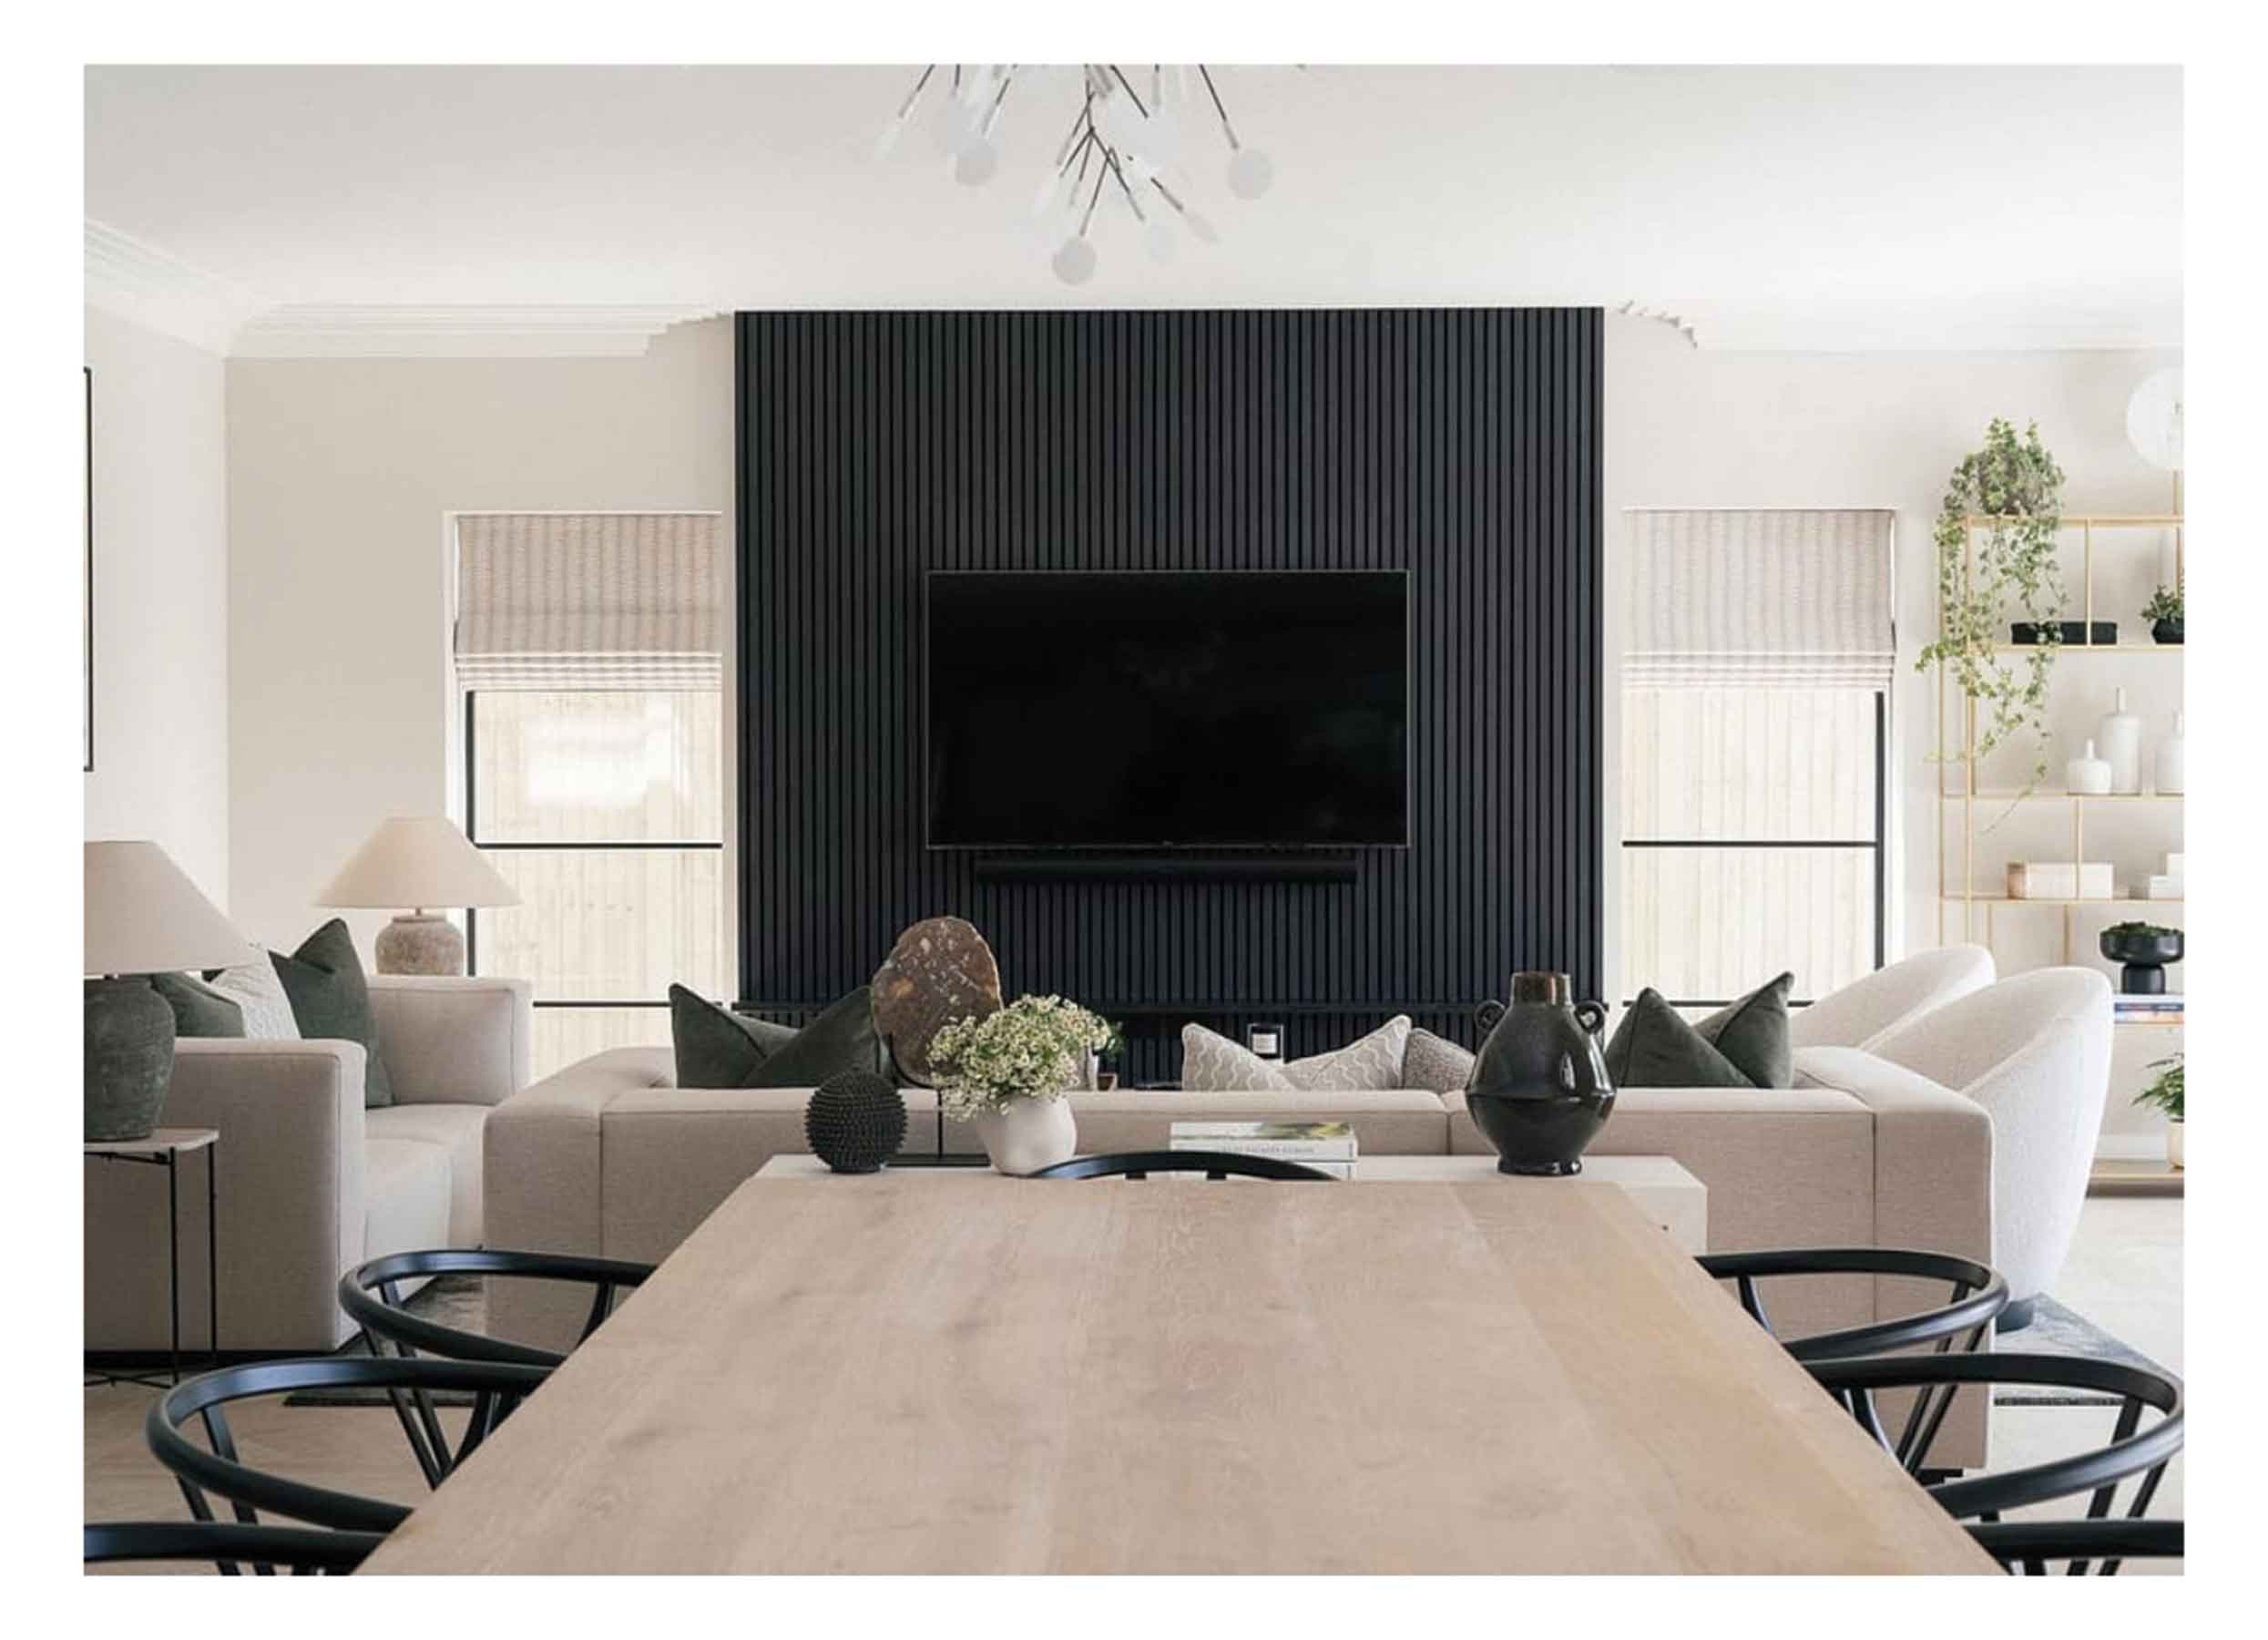 Open-plan living room with neutral walls and sofas, black panels for a media wall, and wood dining table with black chairs.